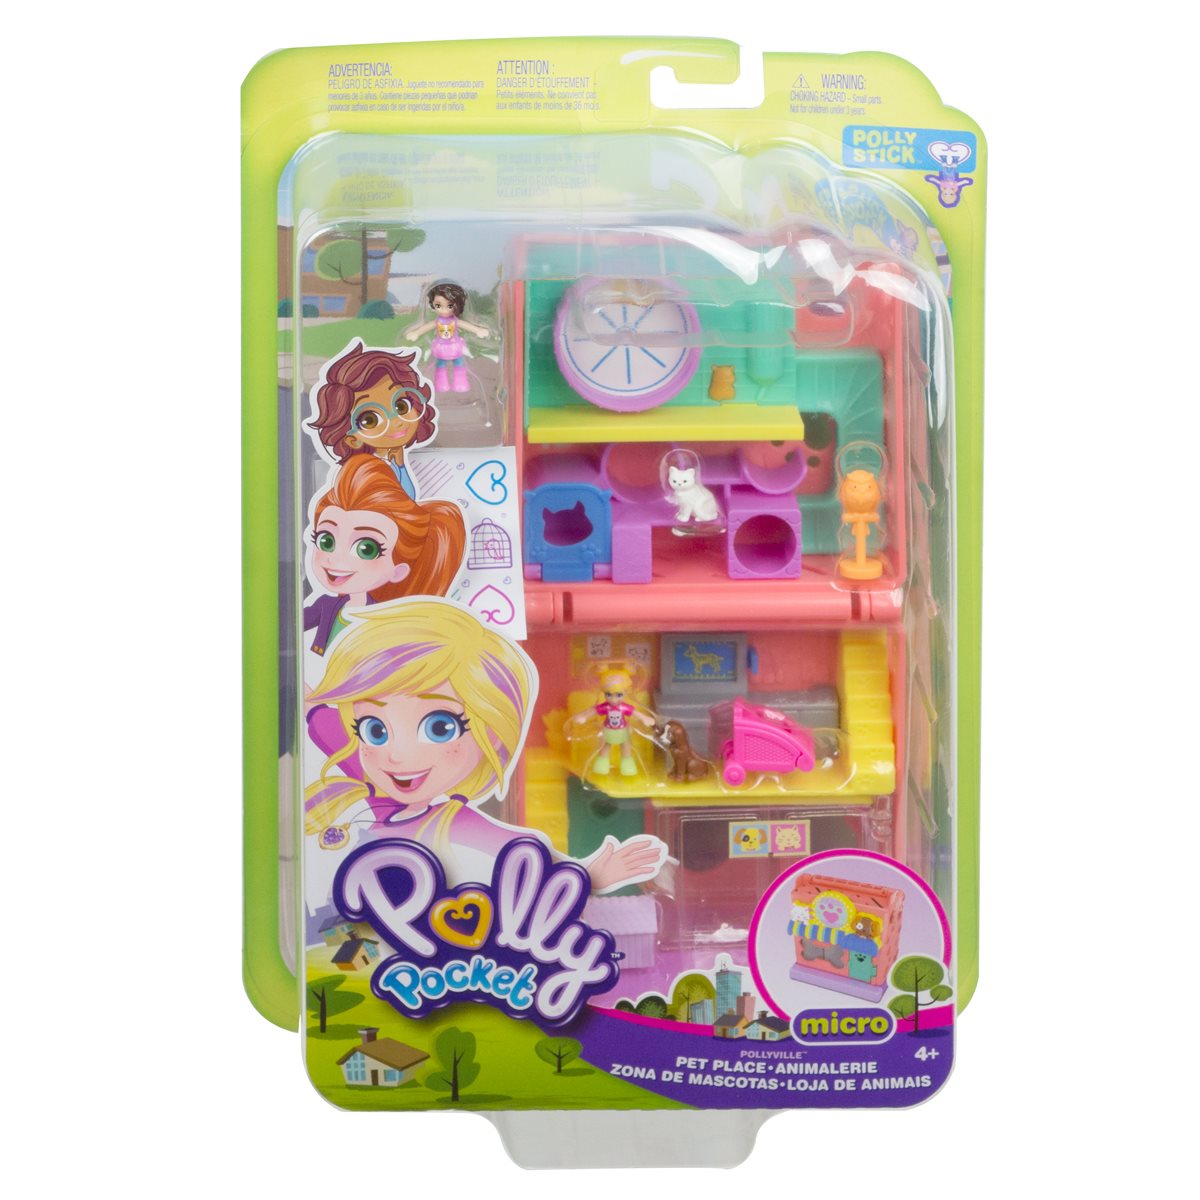 Polly Pocket: Pollyville Store - Pet Place